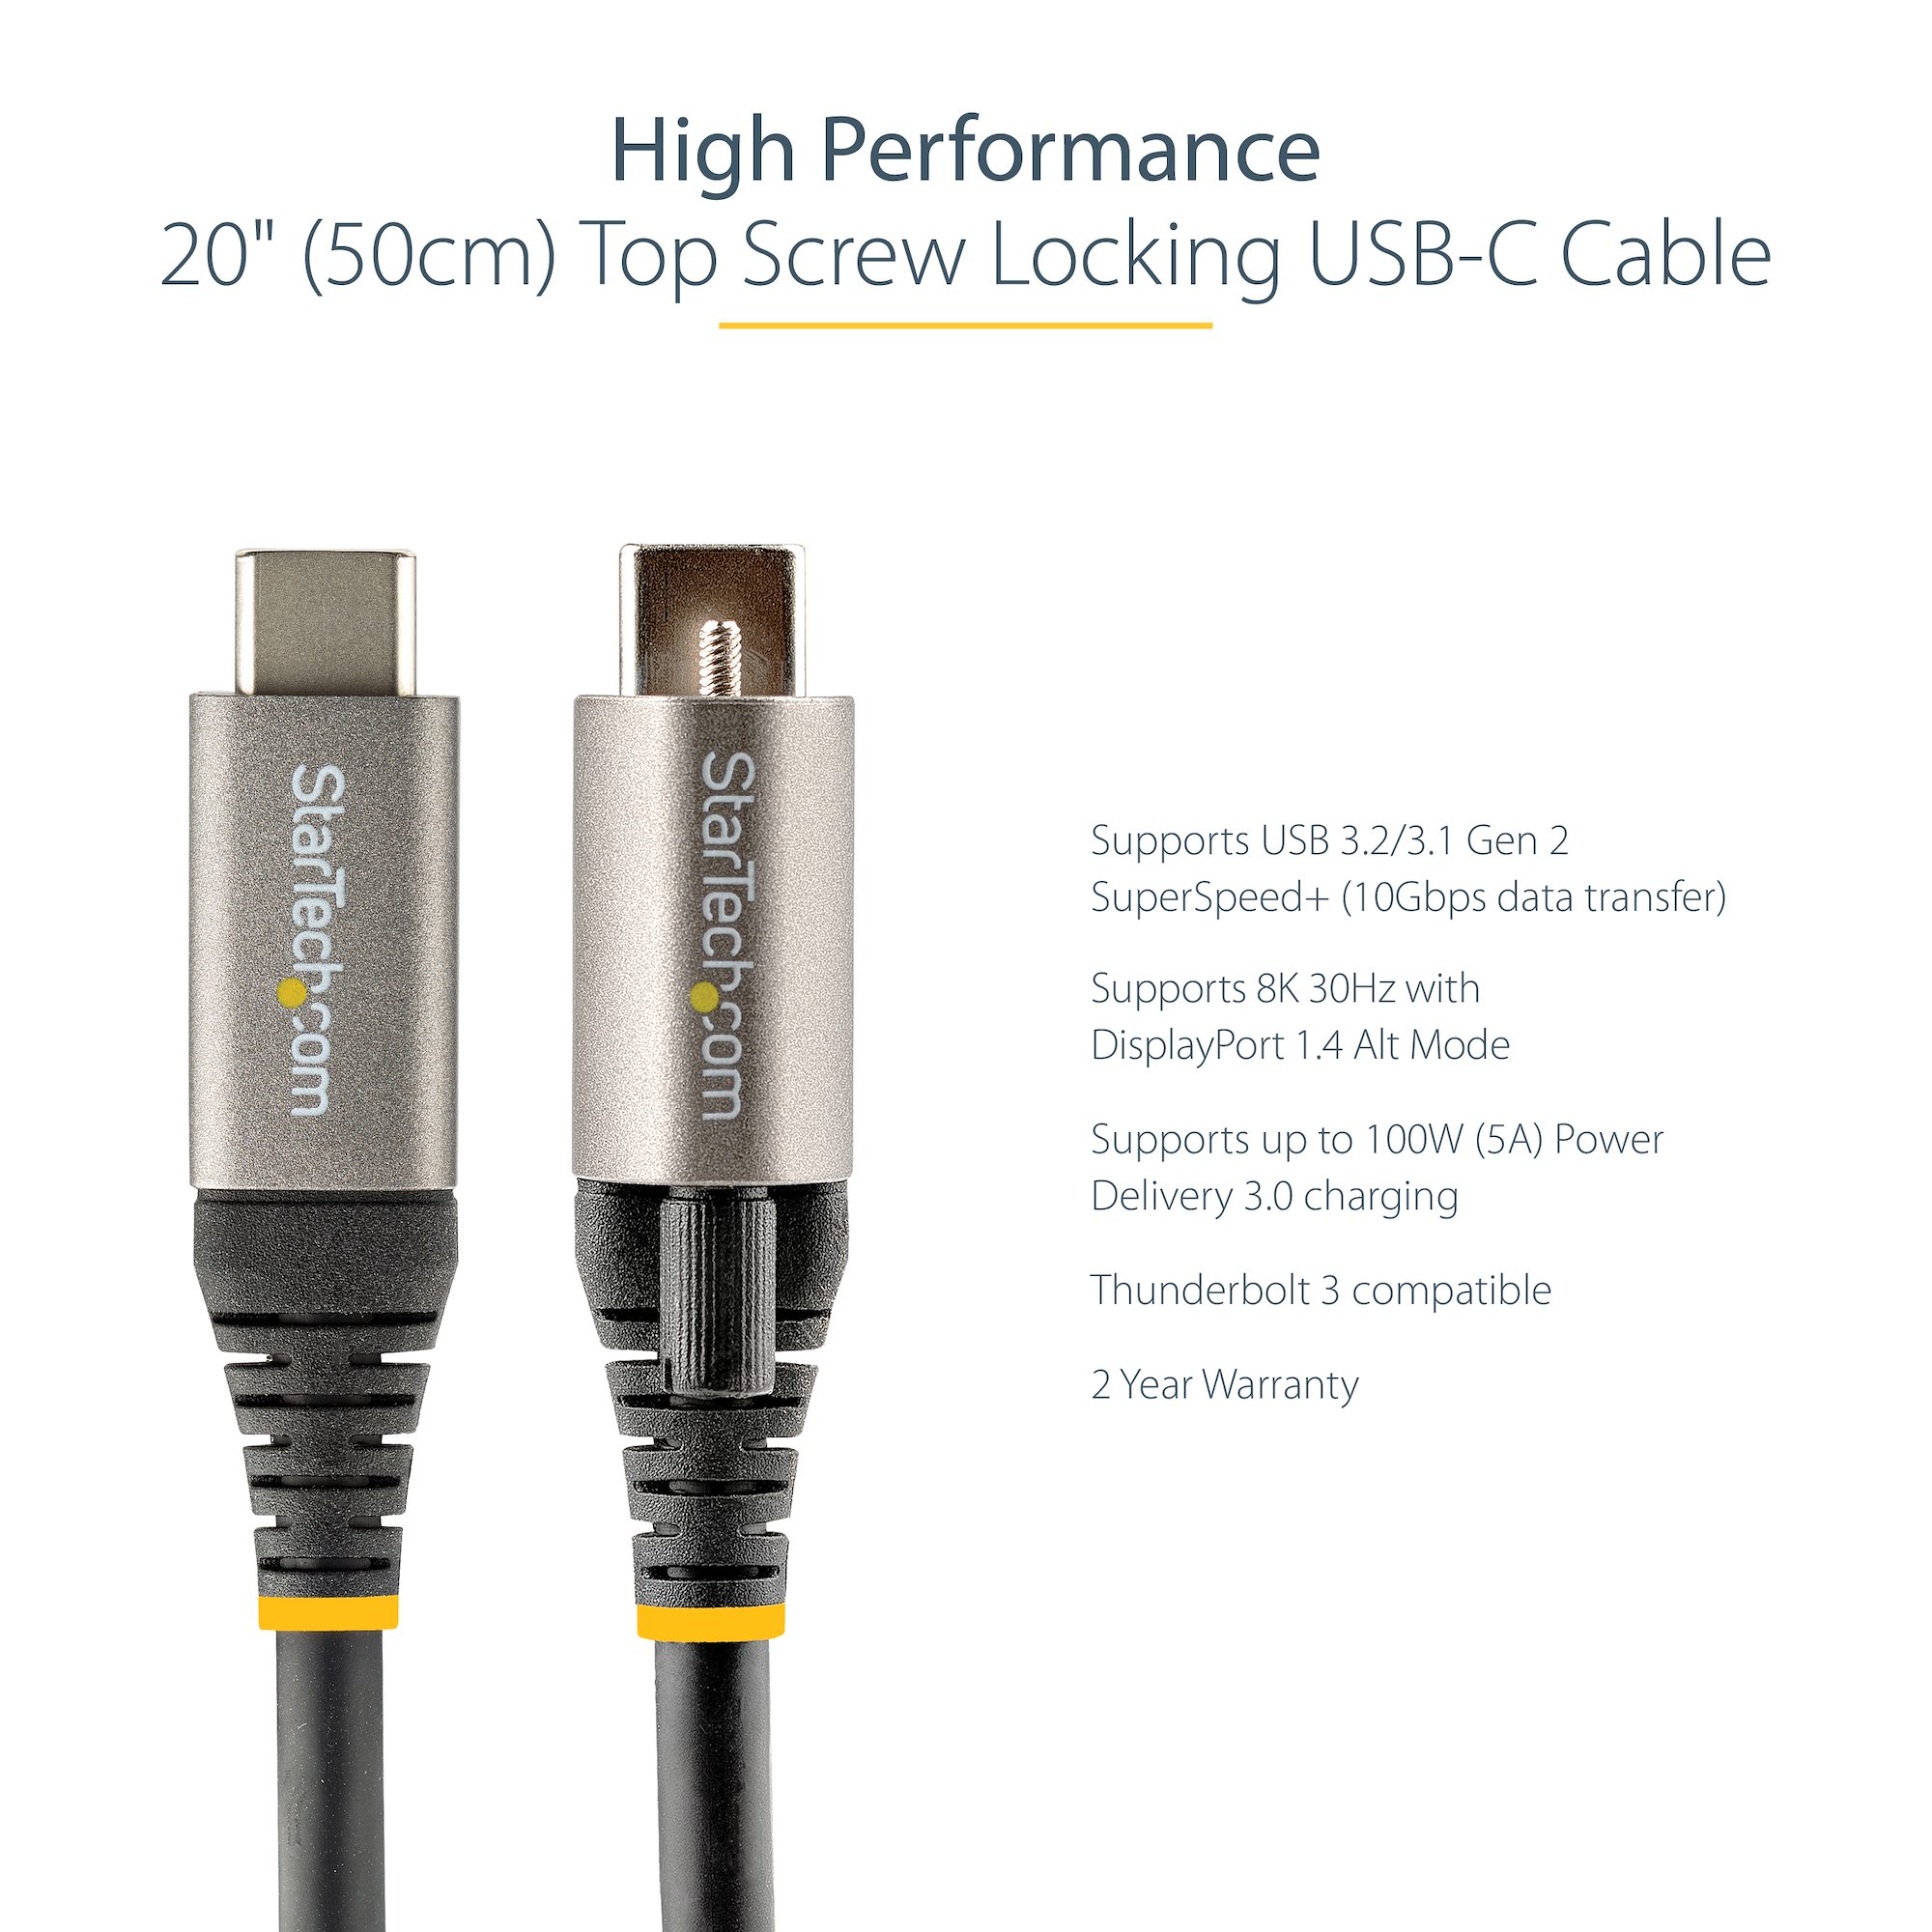 20 (50cm) Top Screw Locking USB C Cable 10Gbps - USB 3.1 Type-C Cable -  100W (5A) Power Delivery Charging, DP Alt Mode - Single Screw Lock, USB-C